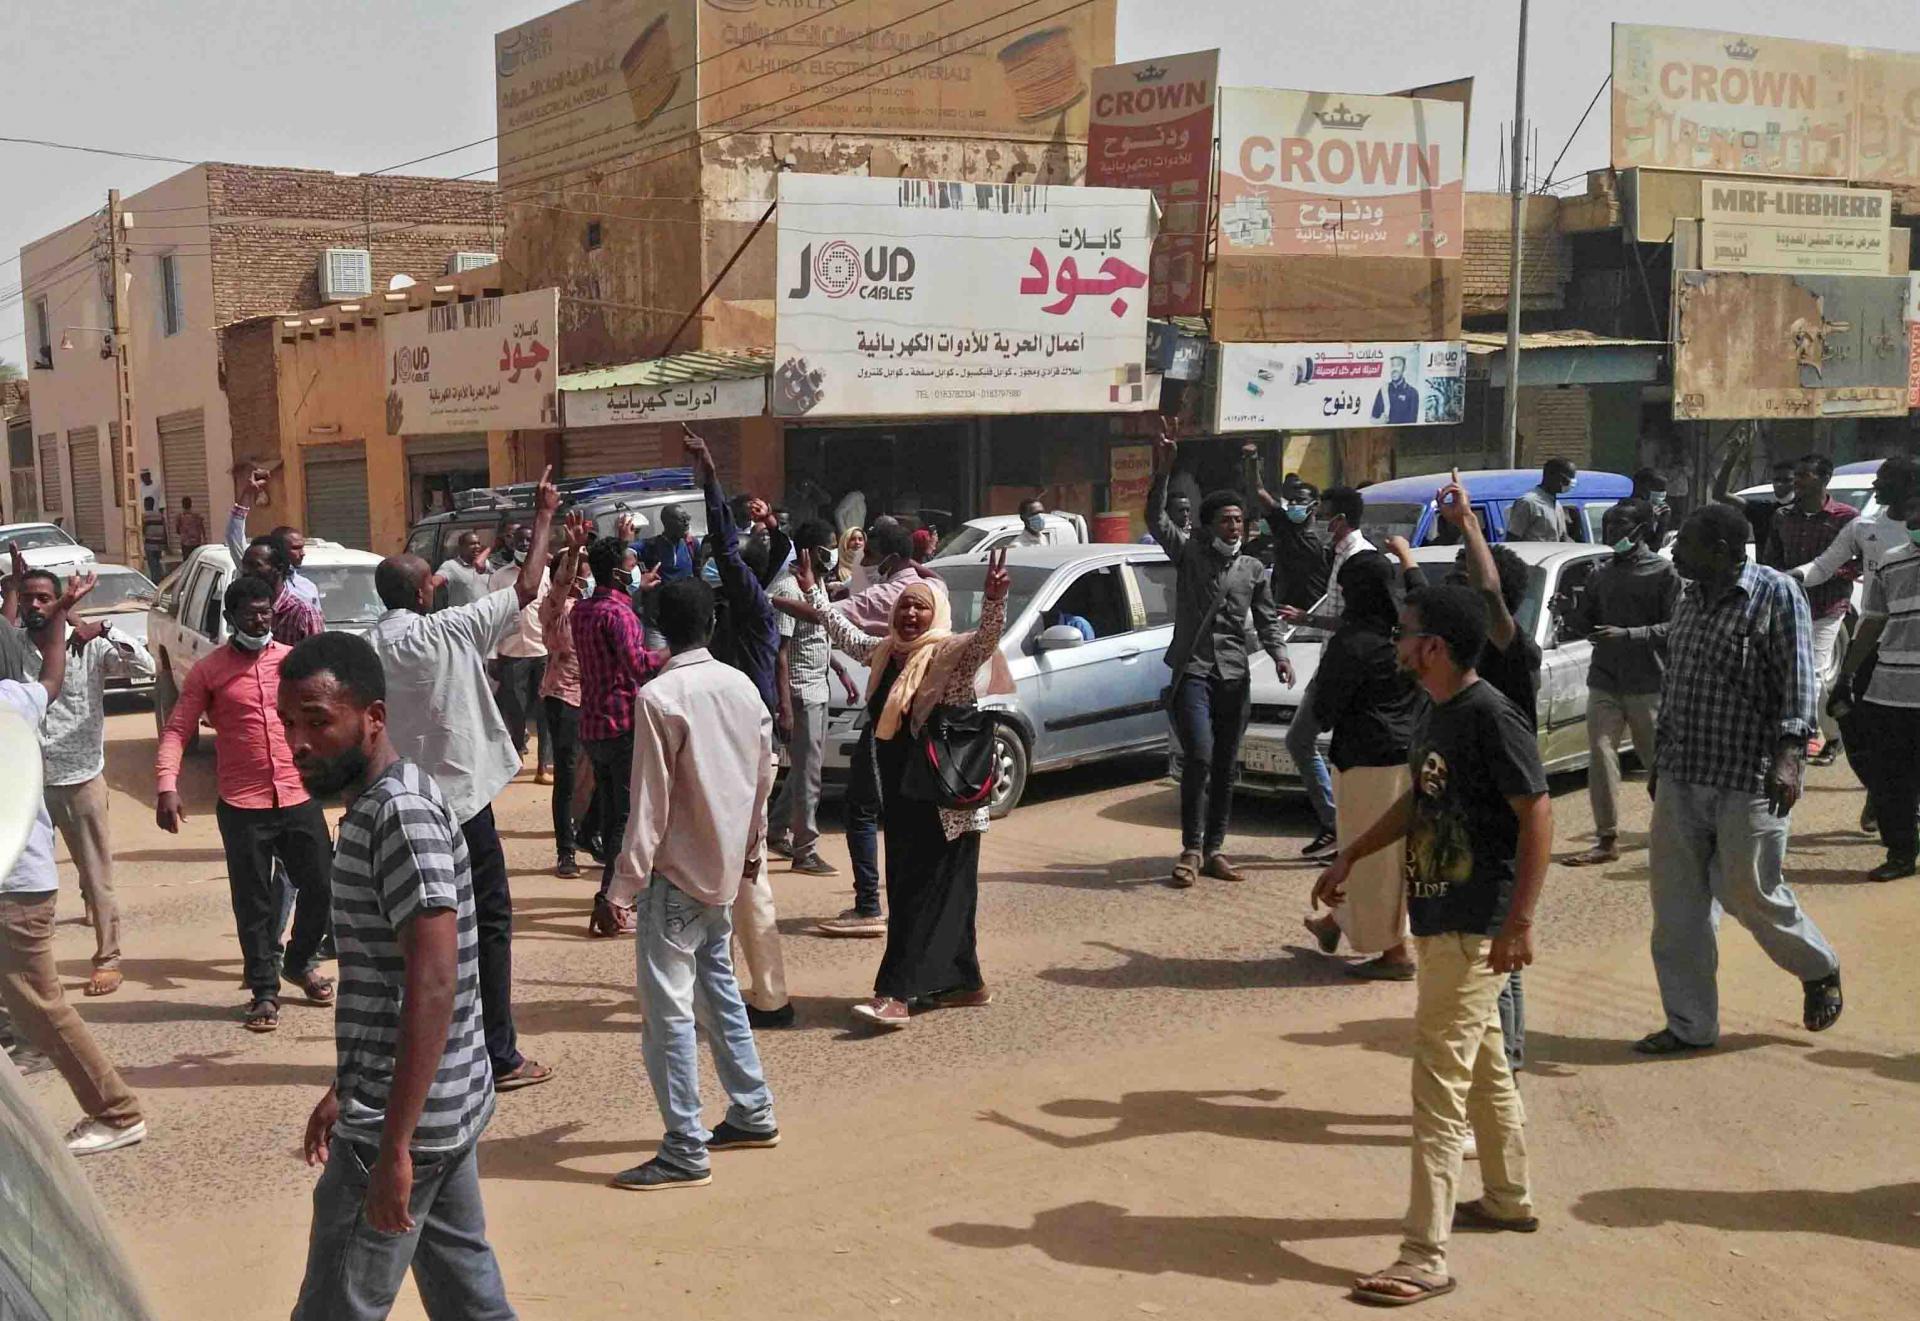 On Wednesday, Bashir acknowledged that youths, mainly women, were leading the rallies and said the public order law was "one of the reasons" for their anger.